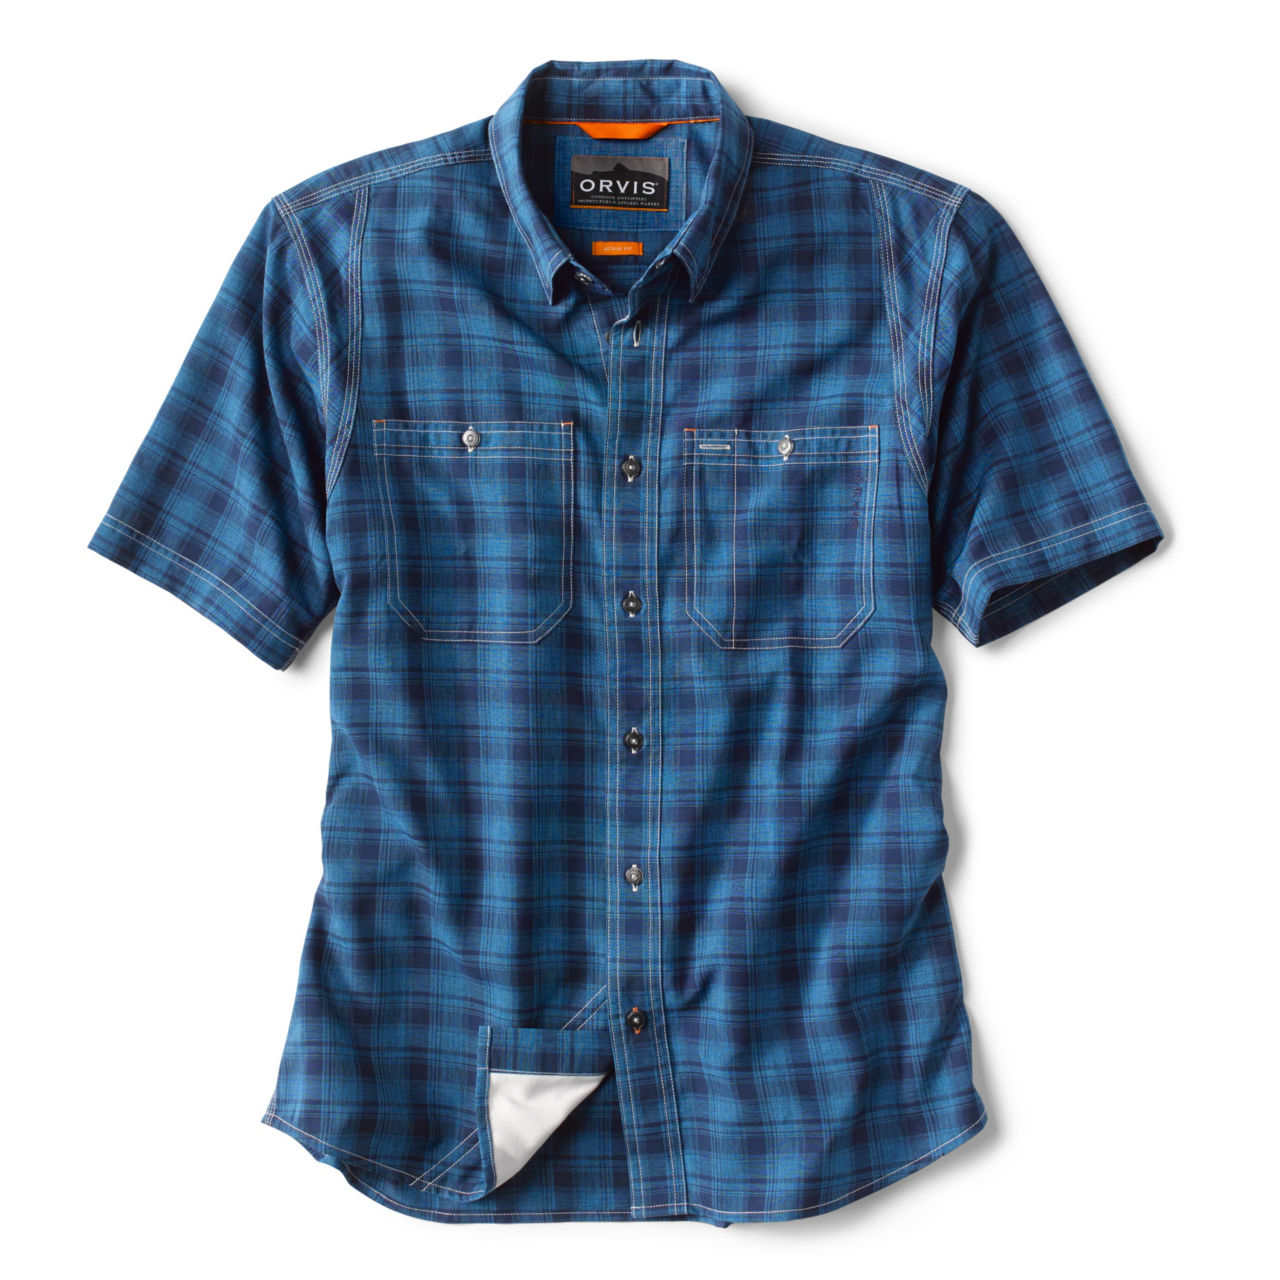 Tech Chambray Short-Sleeved Work Shirt - BLUE MOON PLAID image number 0